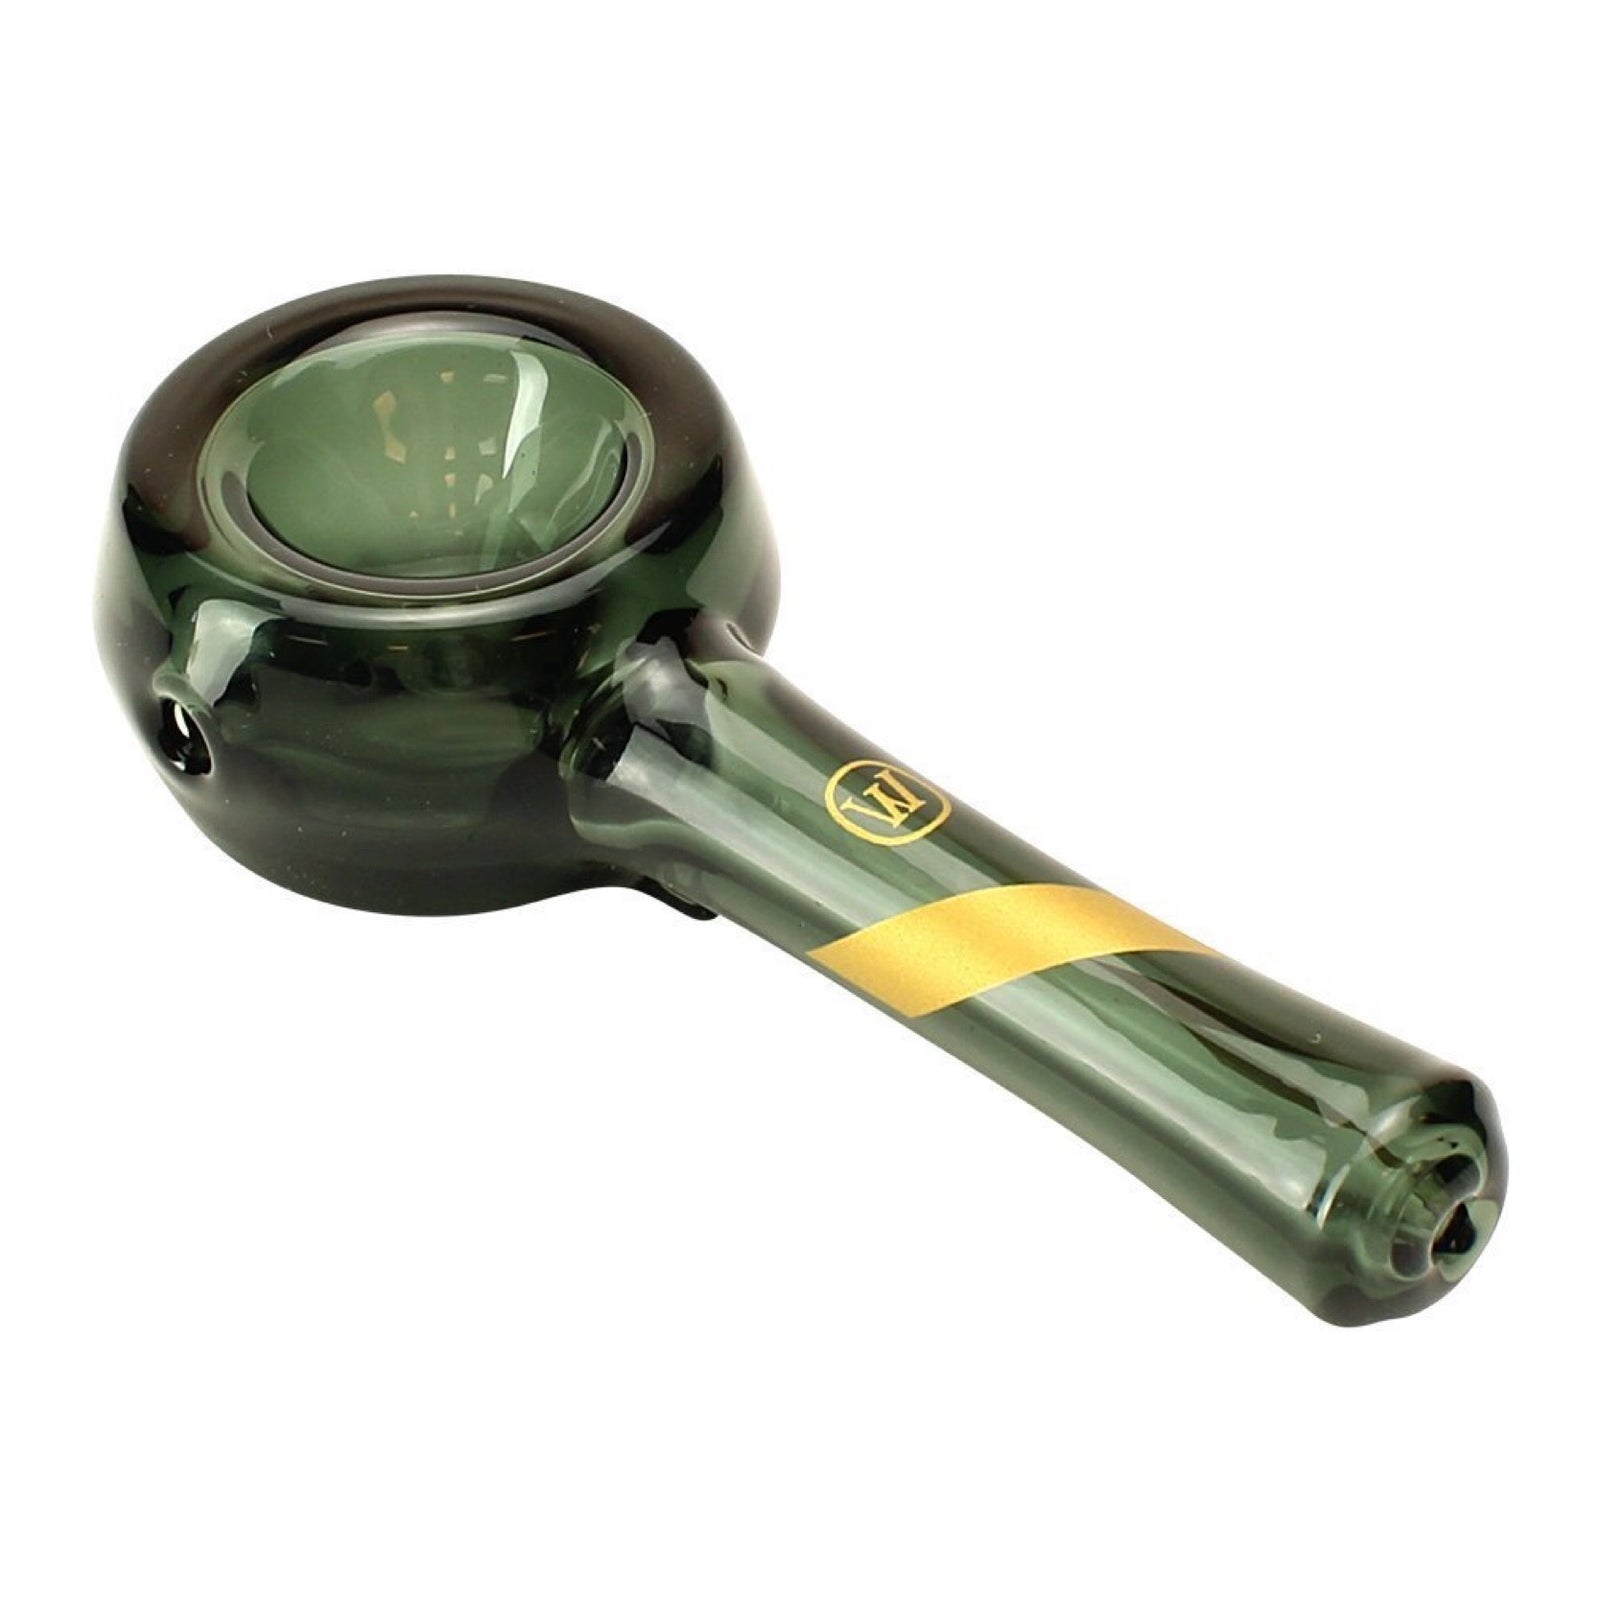 Marley Natural Smoked Glass Spoon Pipe at CaliConnected